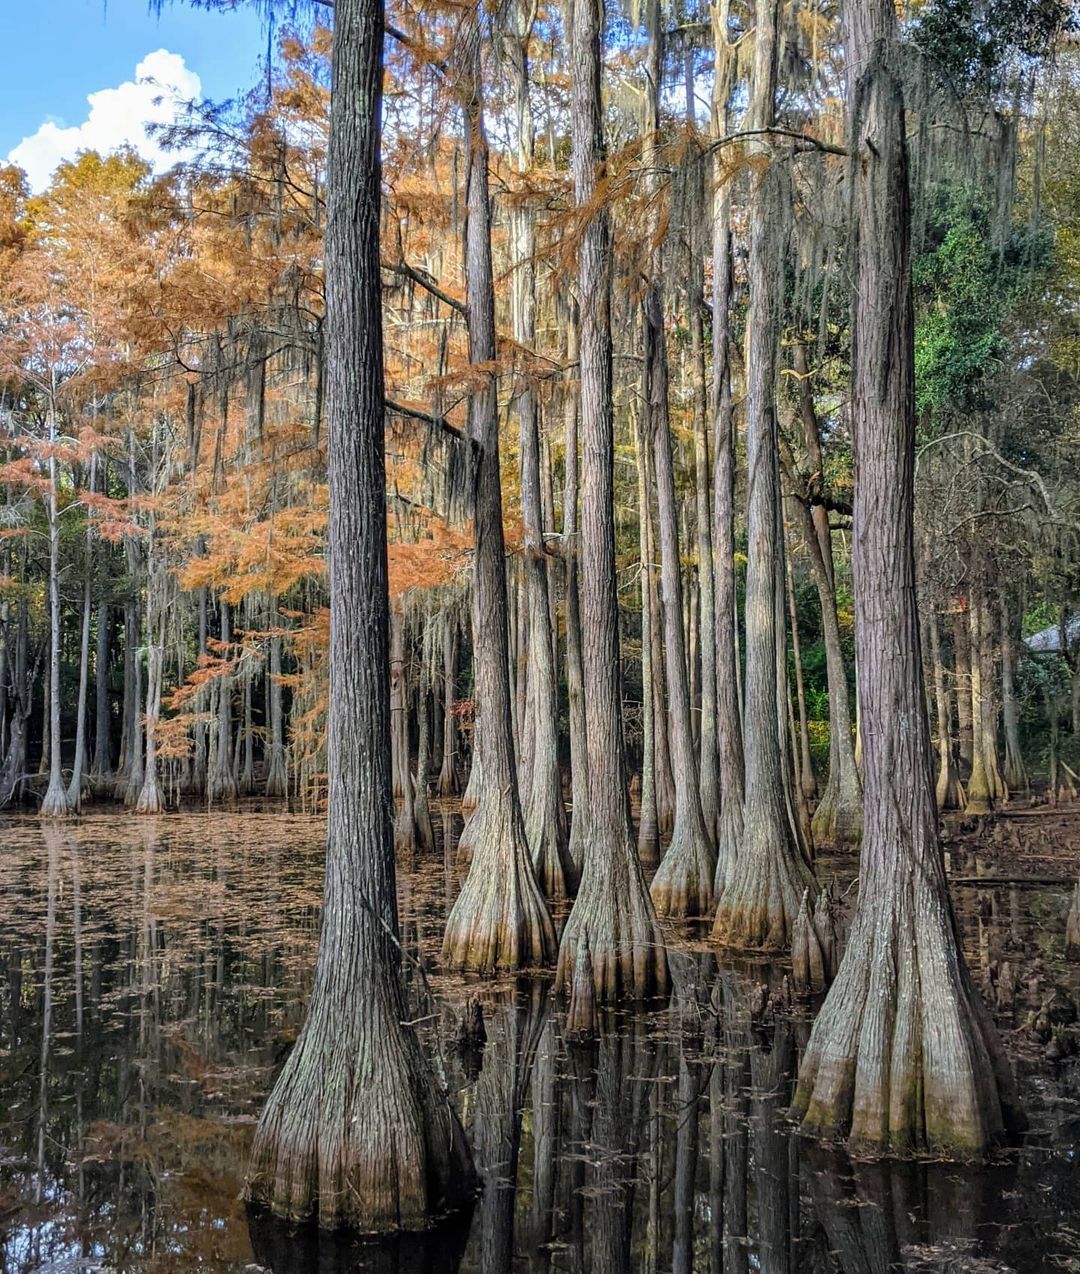 We’re surrounded by natural beauty here at the Tallahassee Museum. We’d love to show you around this week! 😊

📸: @apples_and_oaks_photography

#TallahasseeMuseum #Tallahassee #iHeartTally #ExploreFlorida #LoveFL #Museum #FamilyVacation